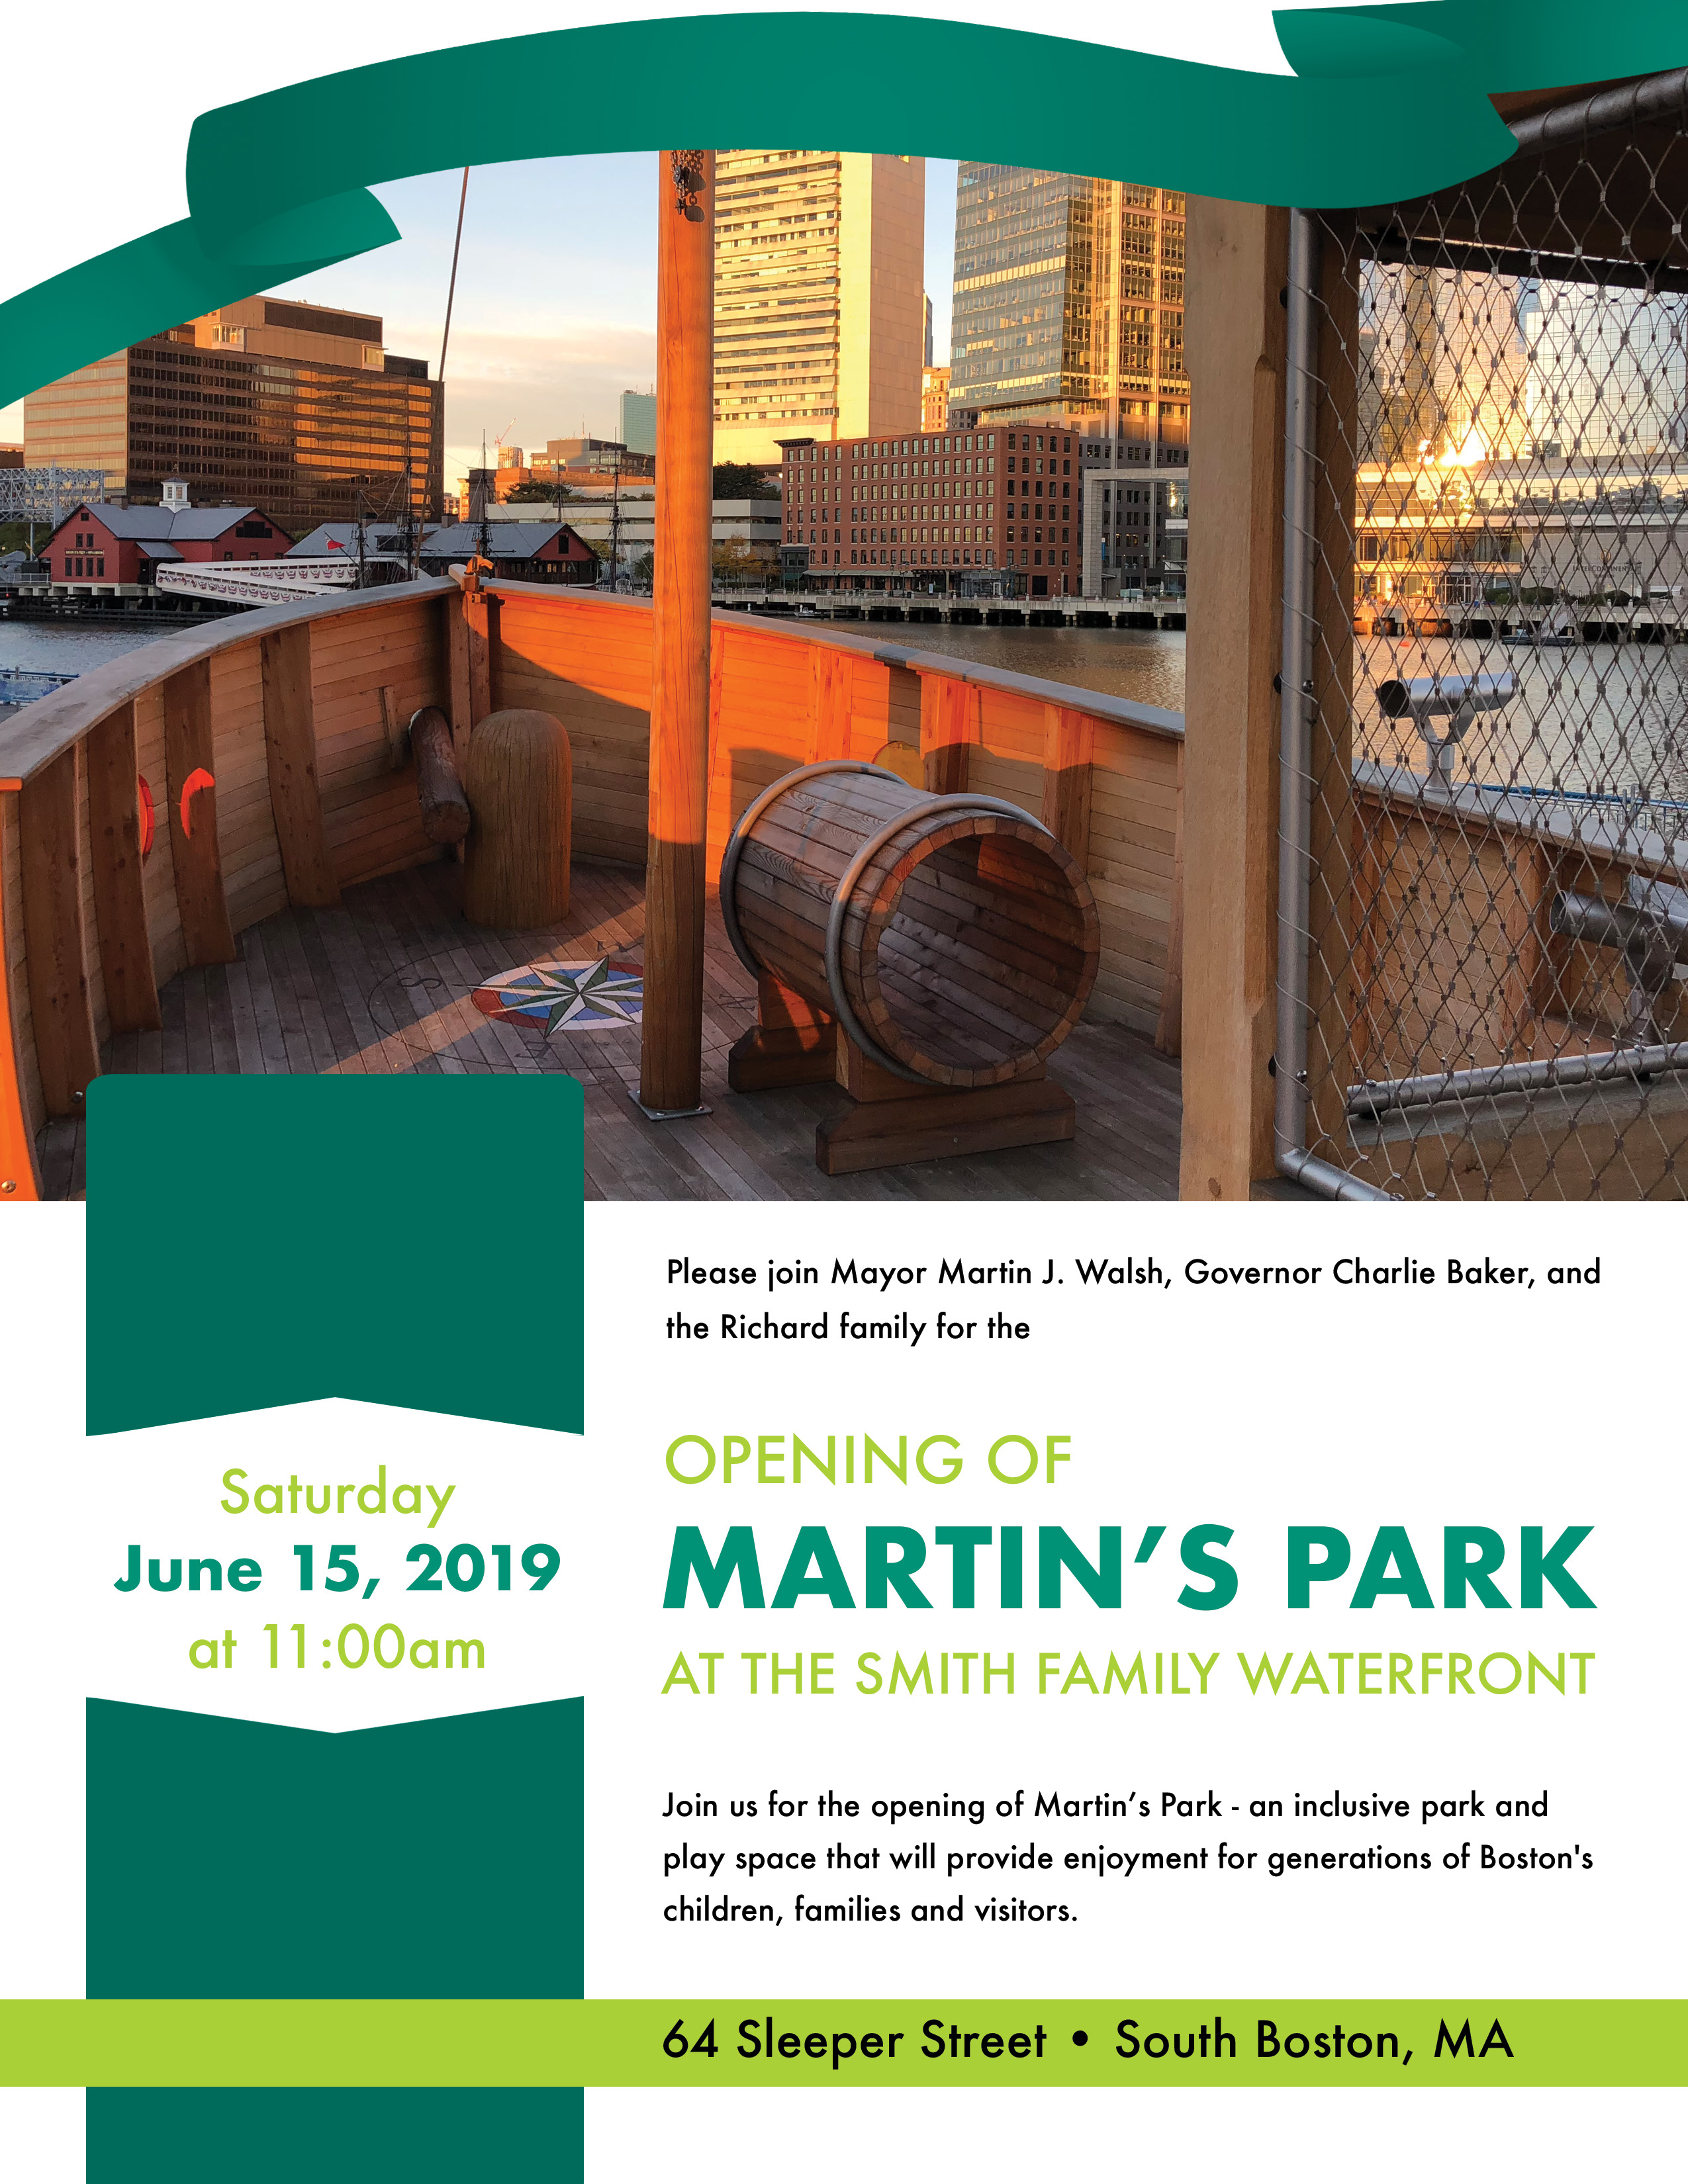 Join us for the opening of Martin’s Park!